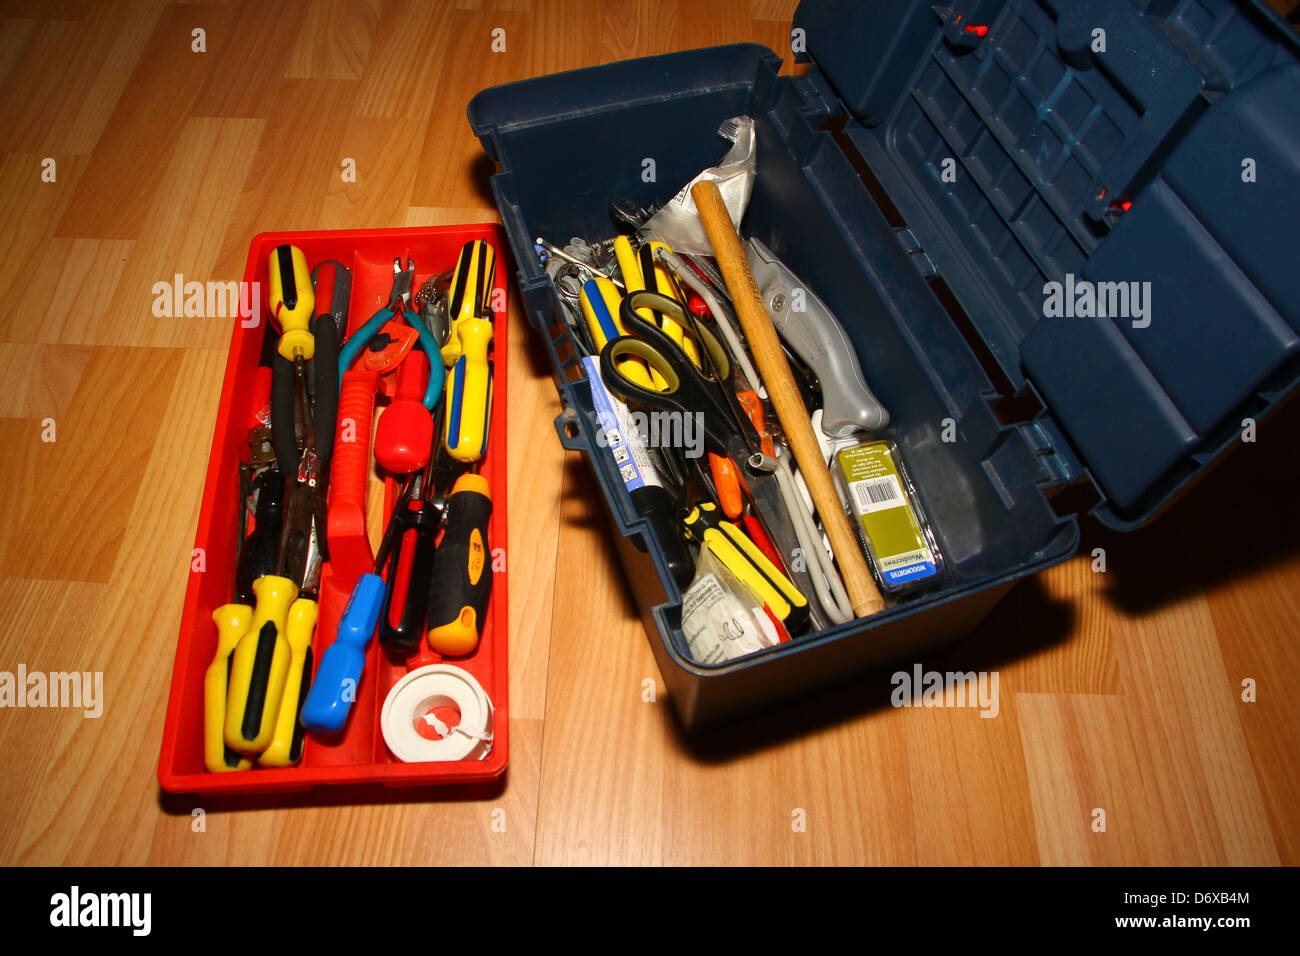 Domestic DIY tool box with common household tools Stock Photo